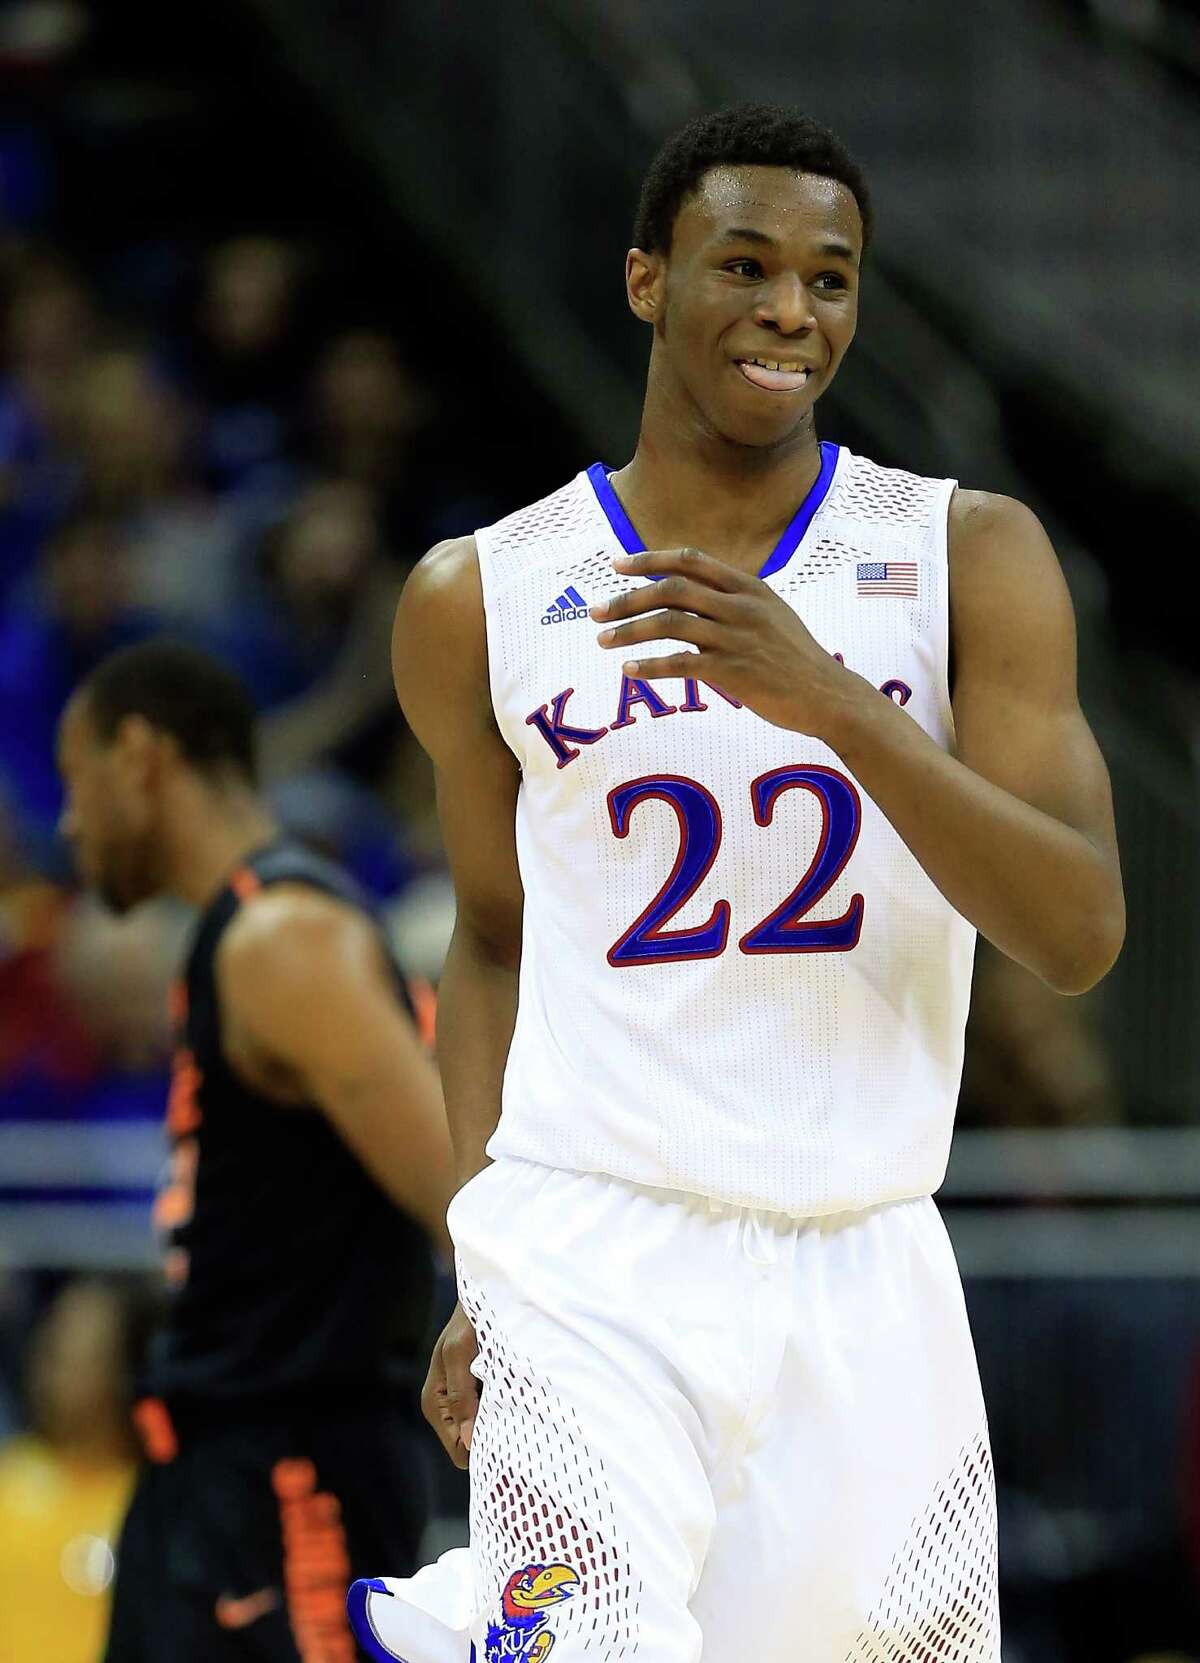 KANSAS CITY, MO - MARCH 13: Andrew Wiggins #22 of the Kansas Jayhawks reacts after making a three-pointer during the Big 12 Basketball Tournament quarterfinal game against the Oklahoma State Cowboys at Sprint Center on March 13, 2014 in Kansas City, Missouri.